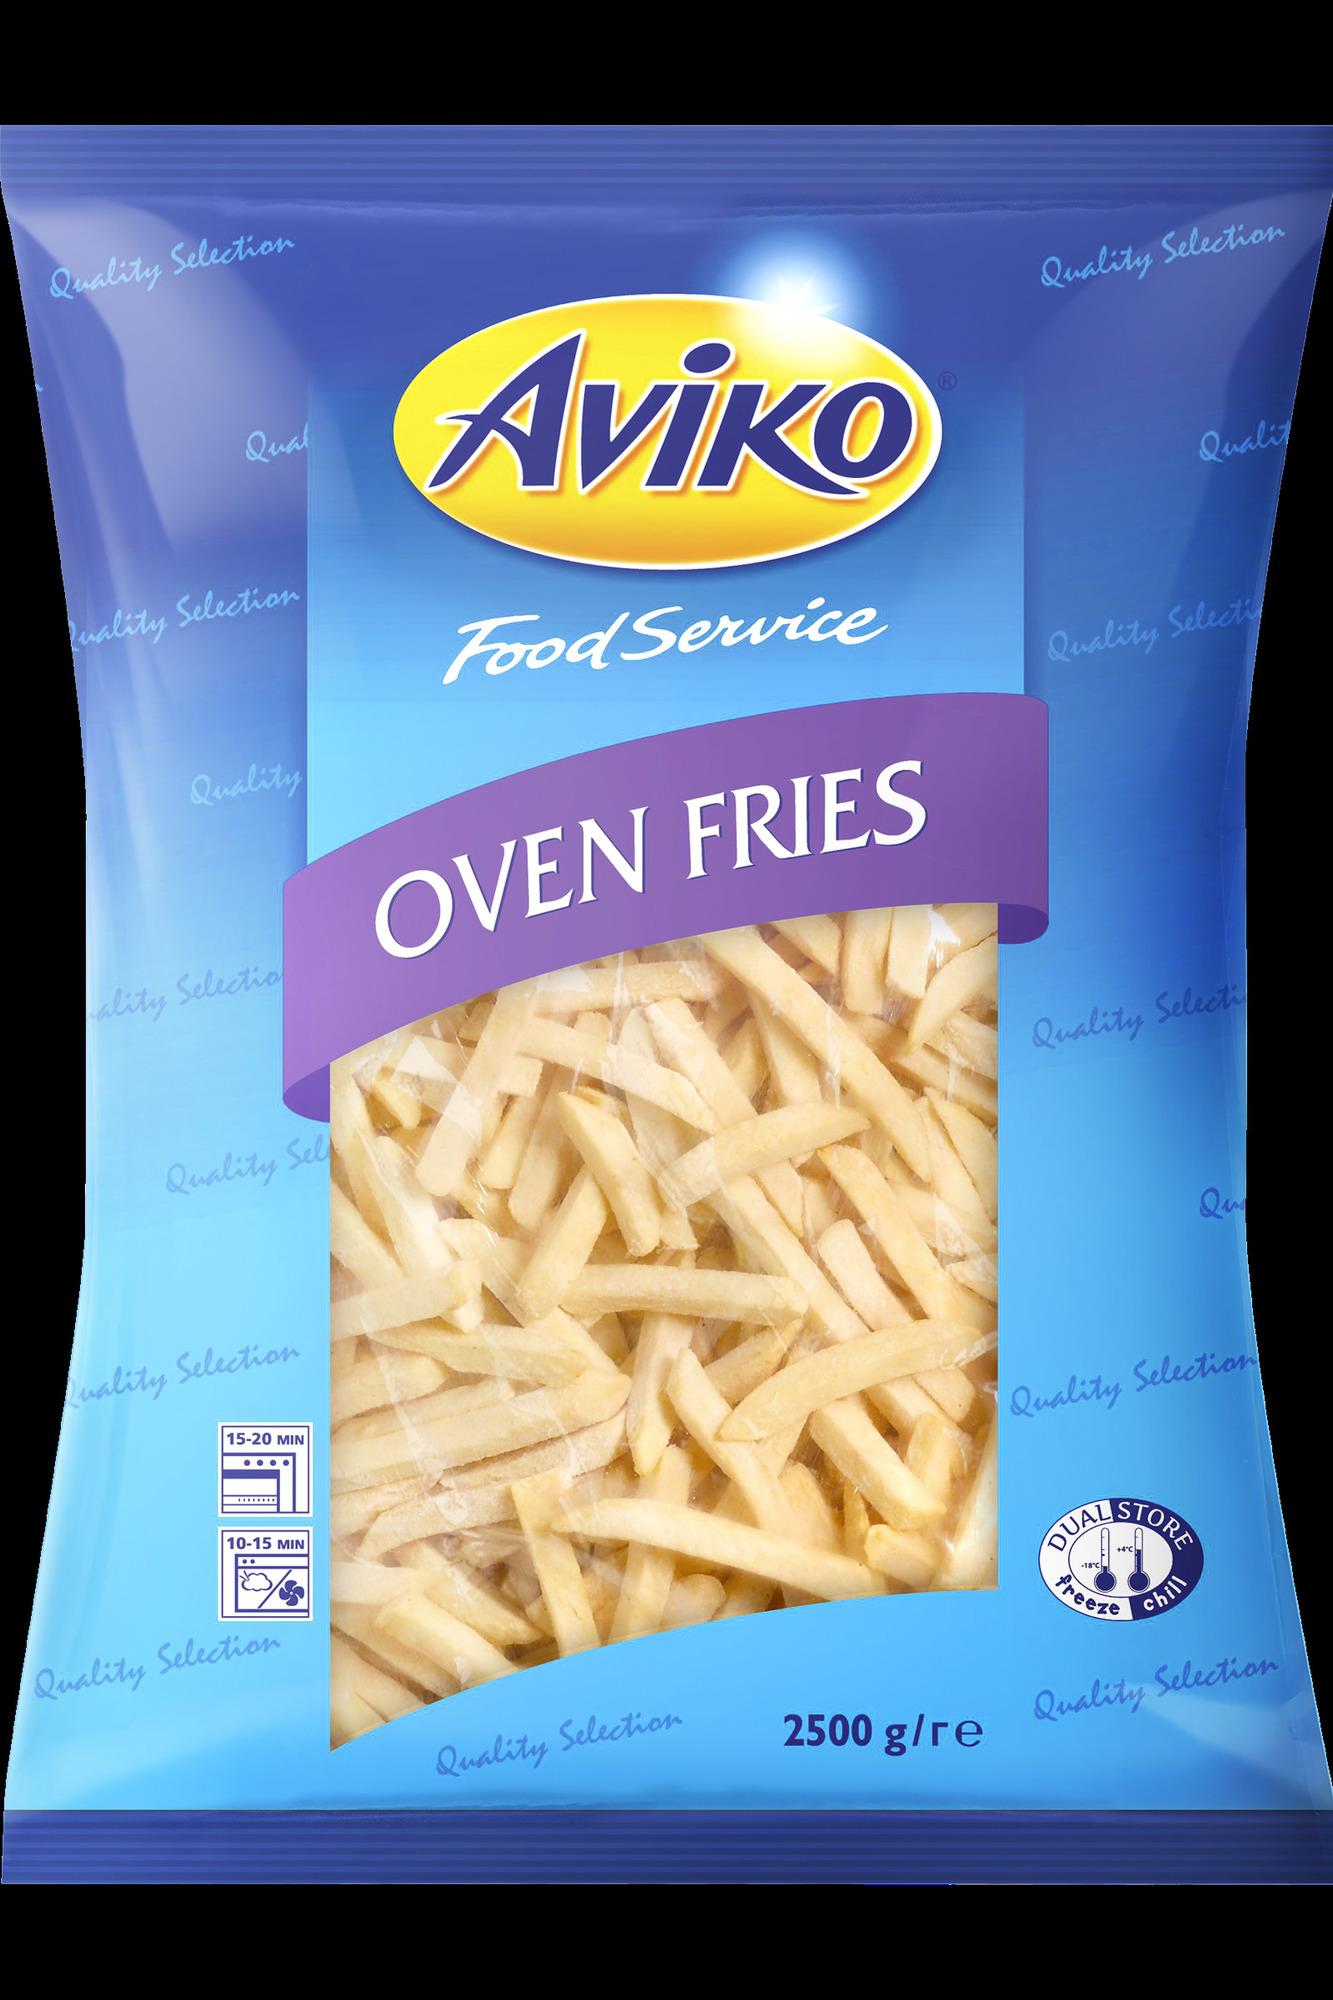 Oven Fries 11x11mm 2500g